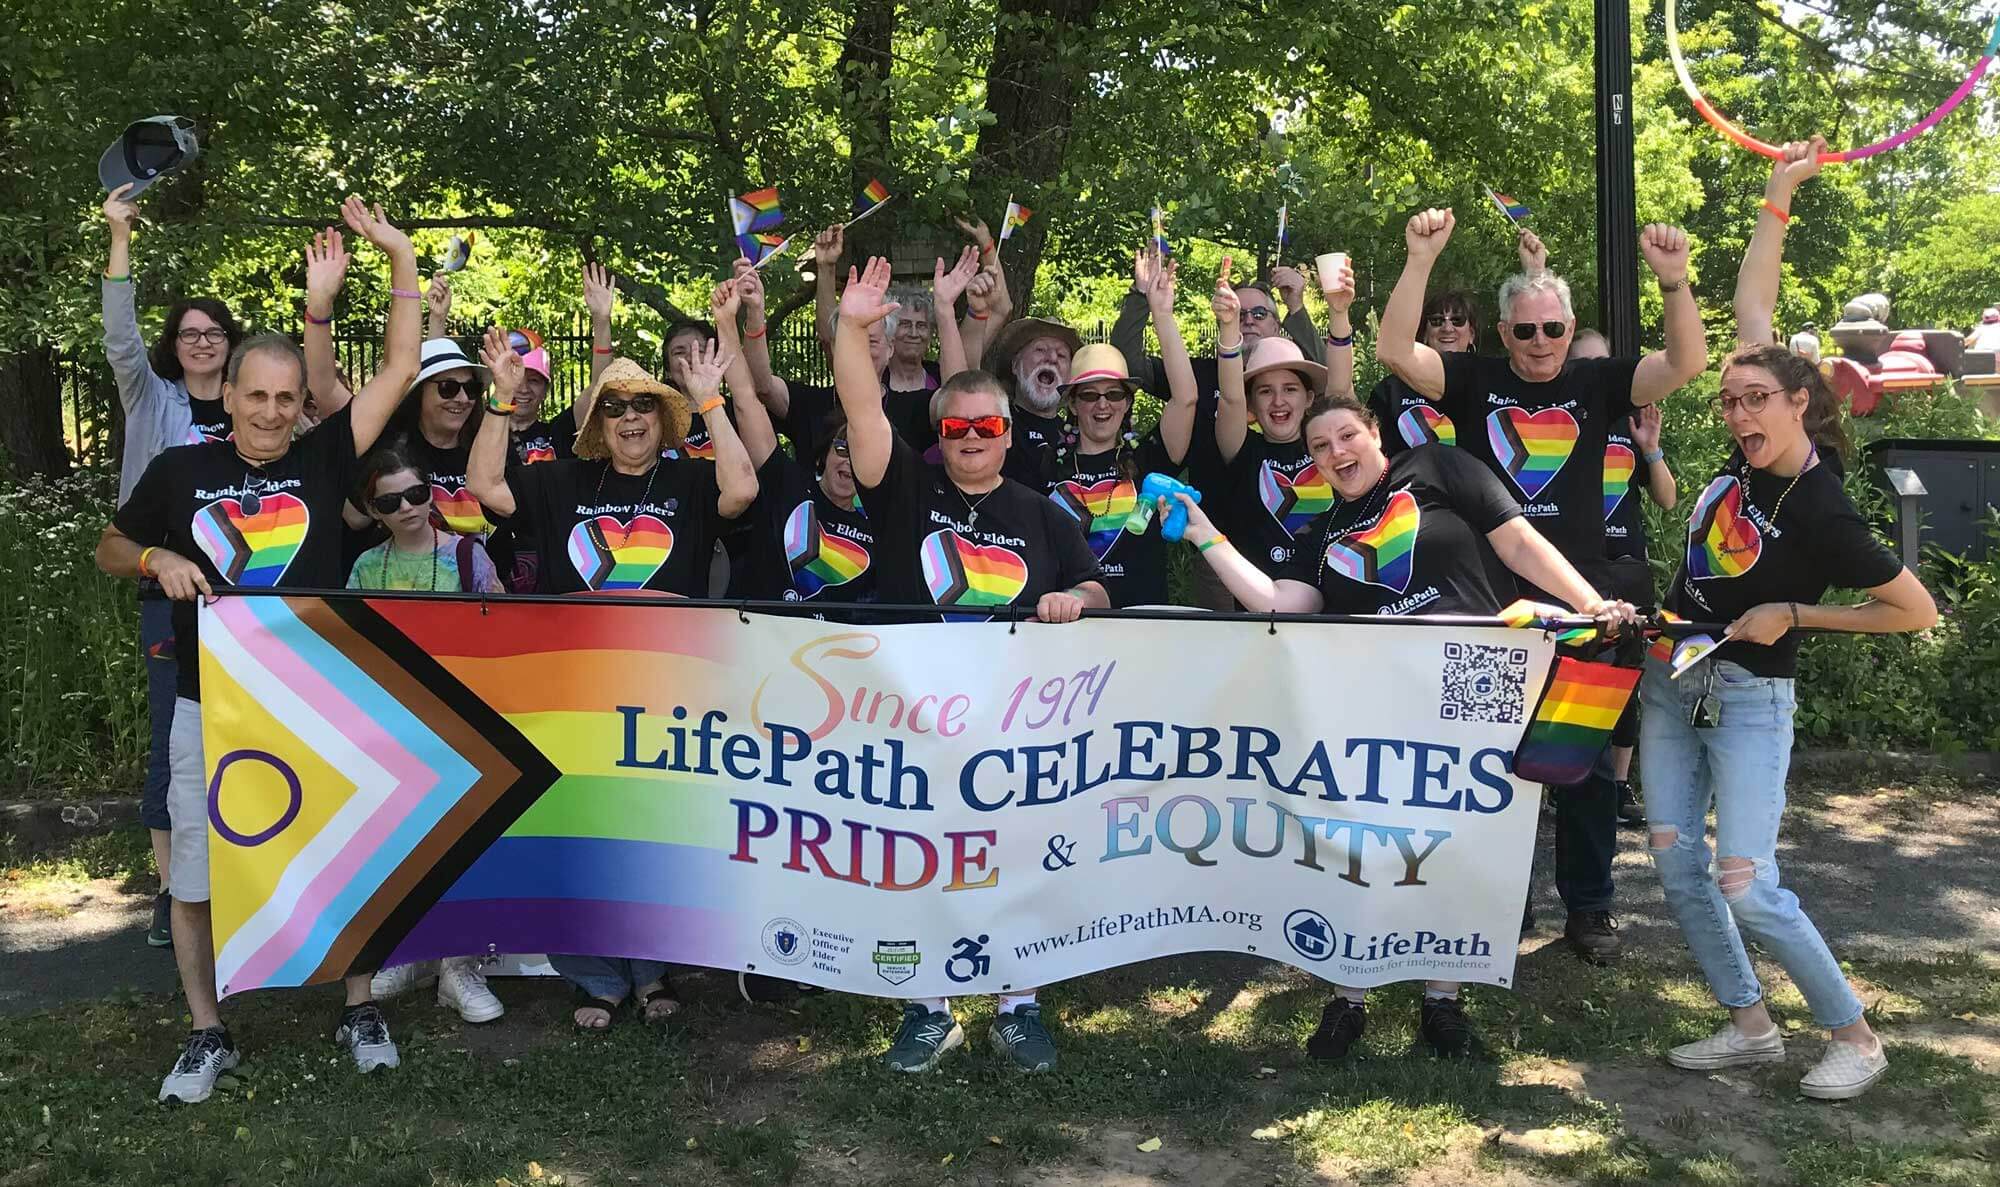 Supporters gather behind a banner that says "LifePath Celebrates Pride and Equity"